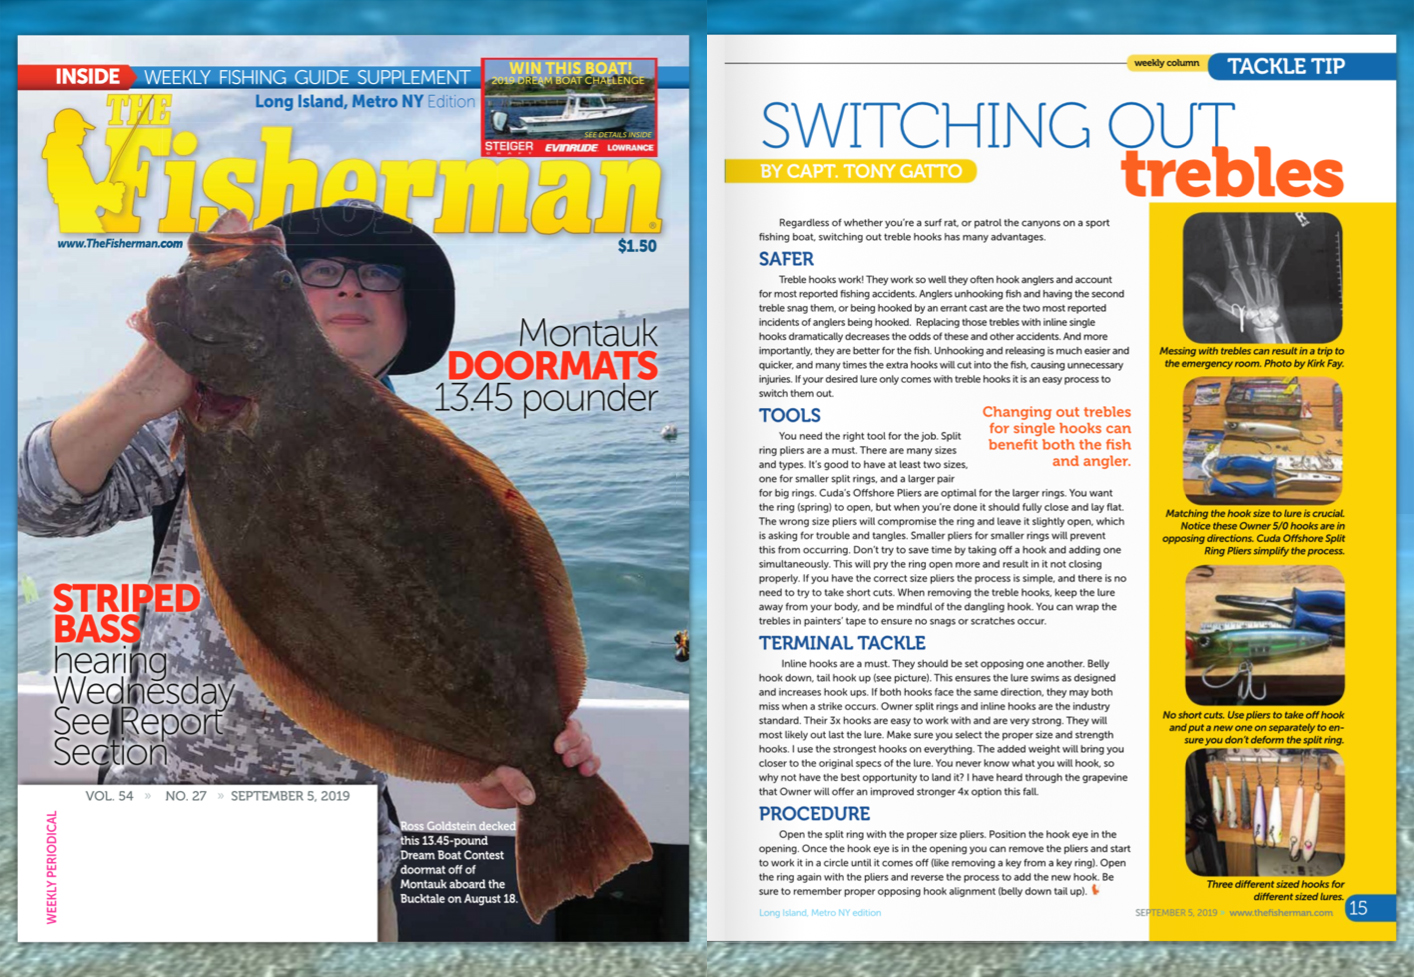 Switching Out Trebles- Featured in Fisherman September 5, 2019